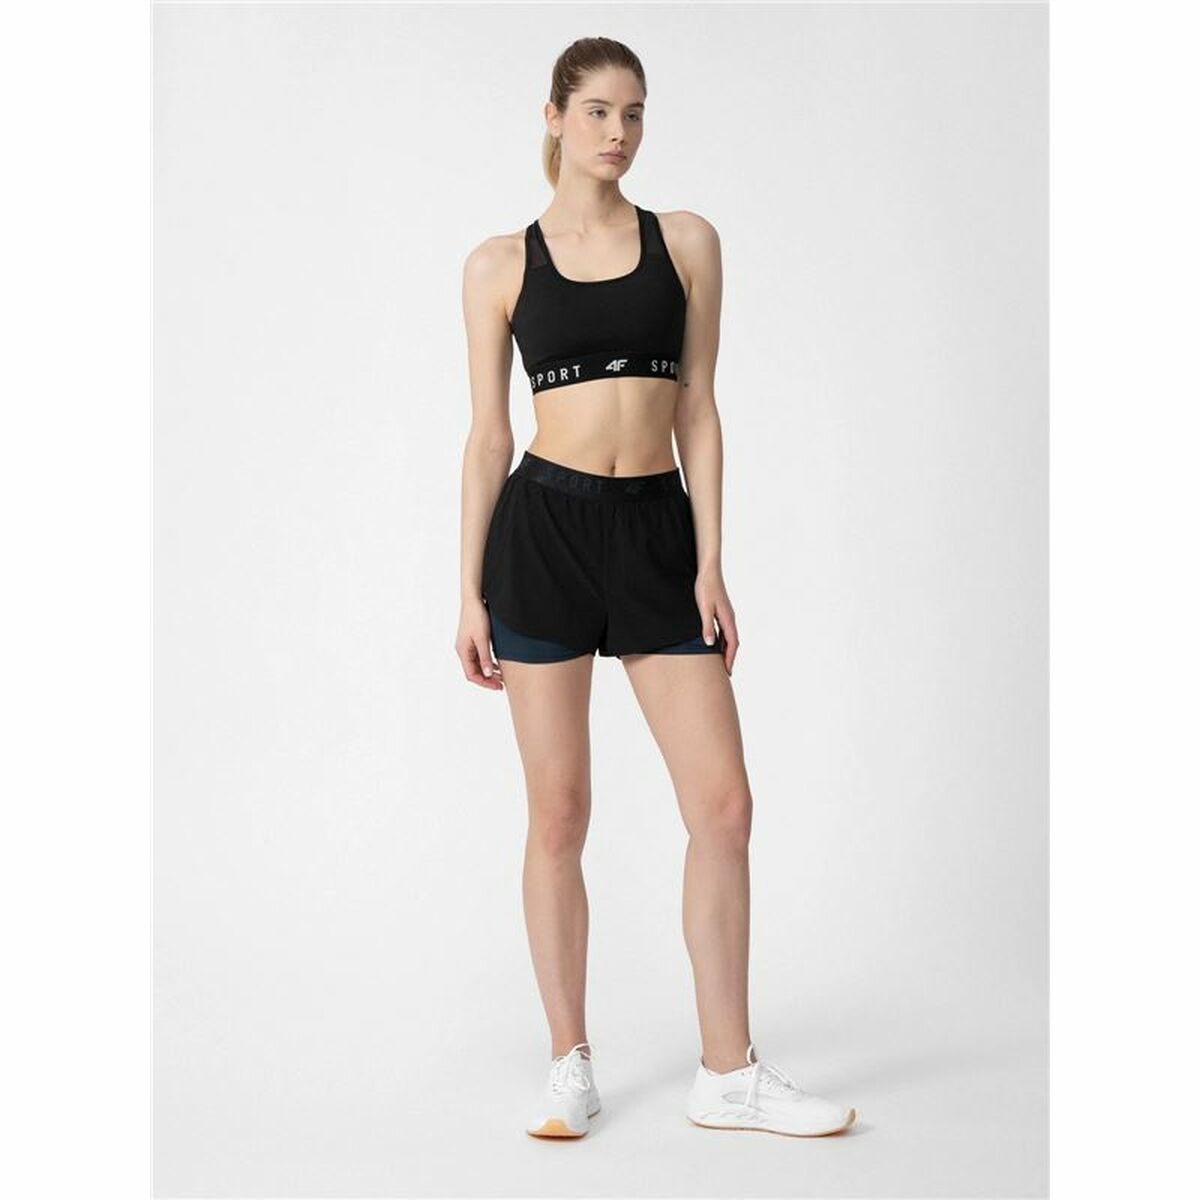 Sports Shorts for Women 4F